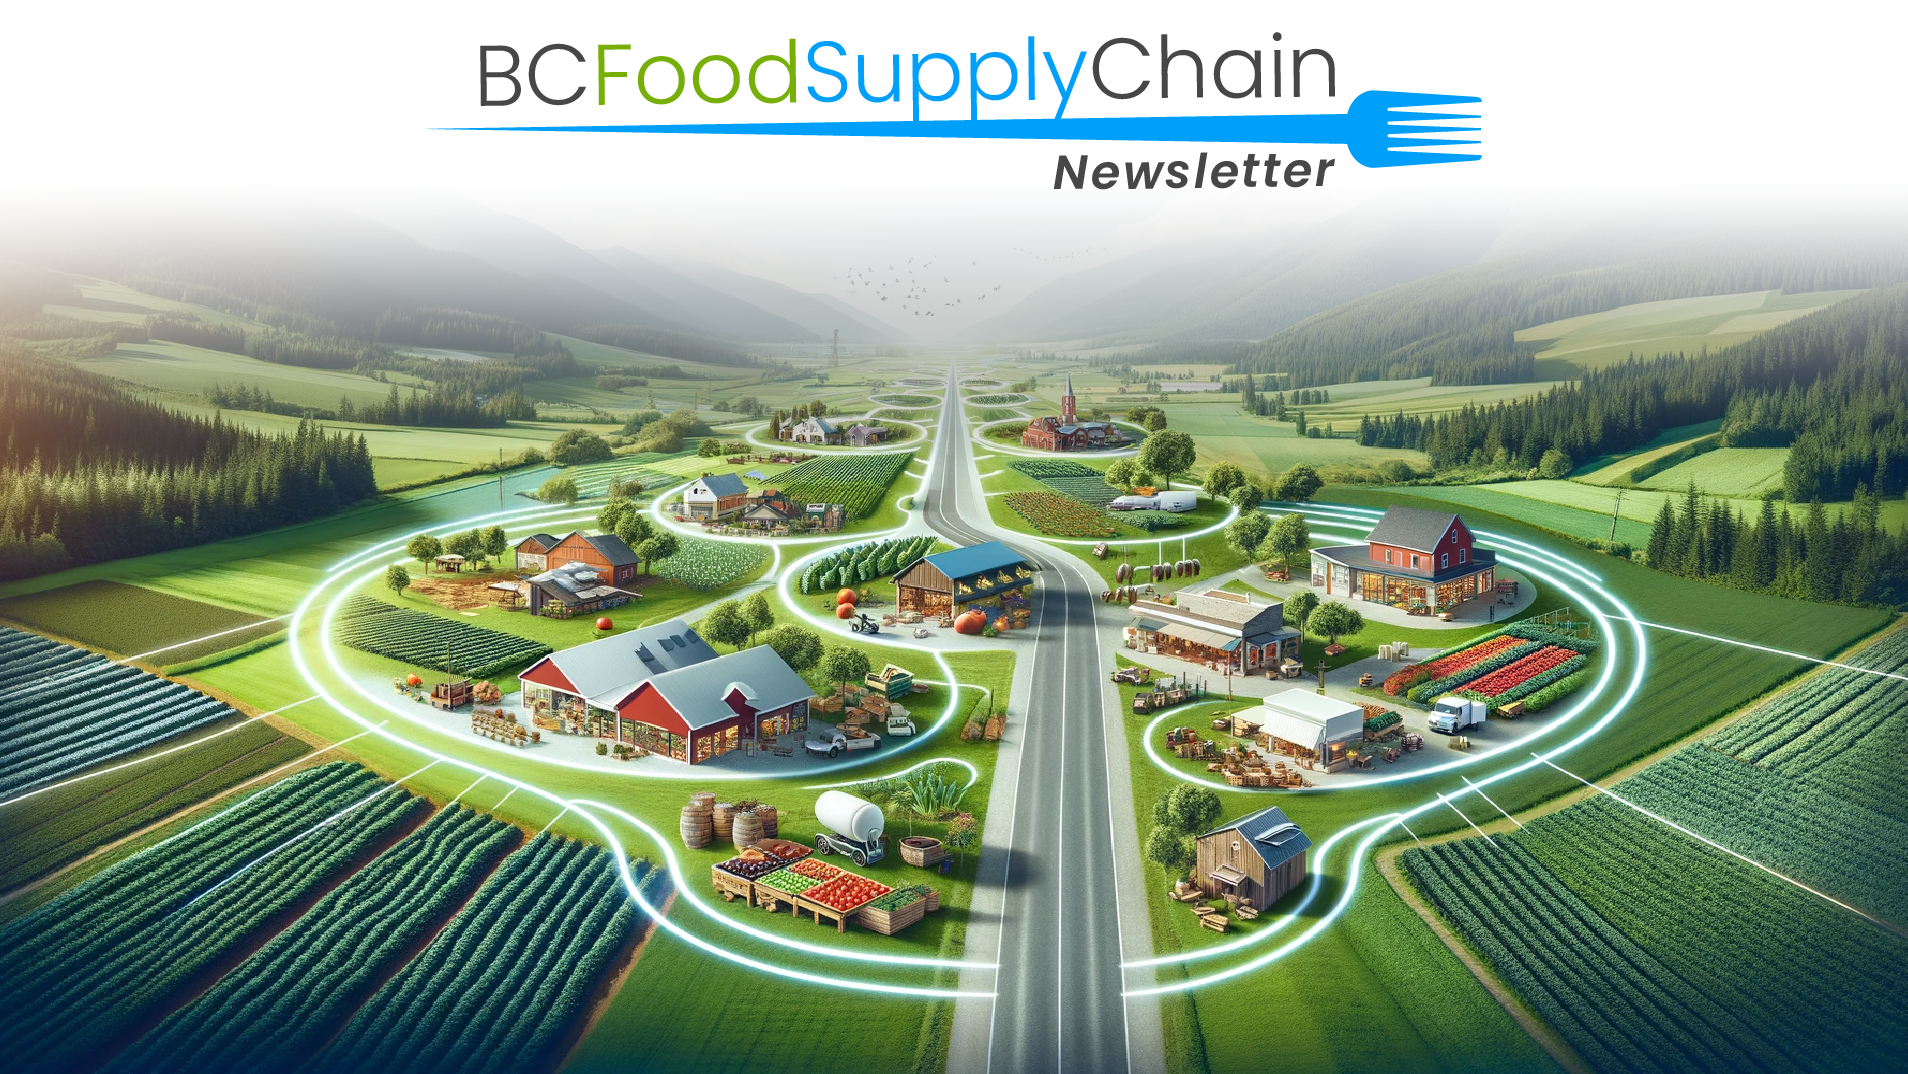 Cover of BC Food Supply Chain Newsletter Volume 1, Issue 1, featuring an illustrative aerial view of interconnected farms and distribution networks in a lush green valley.